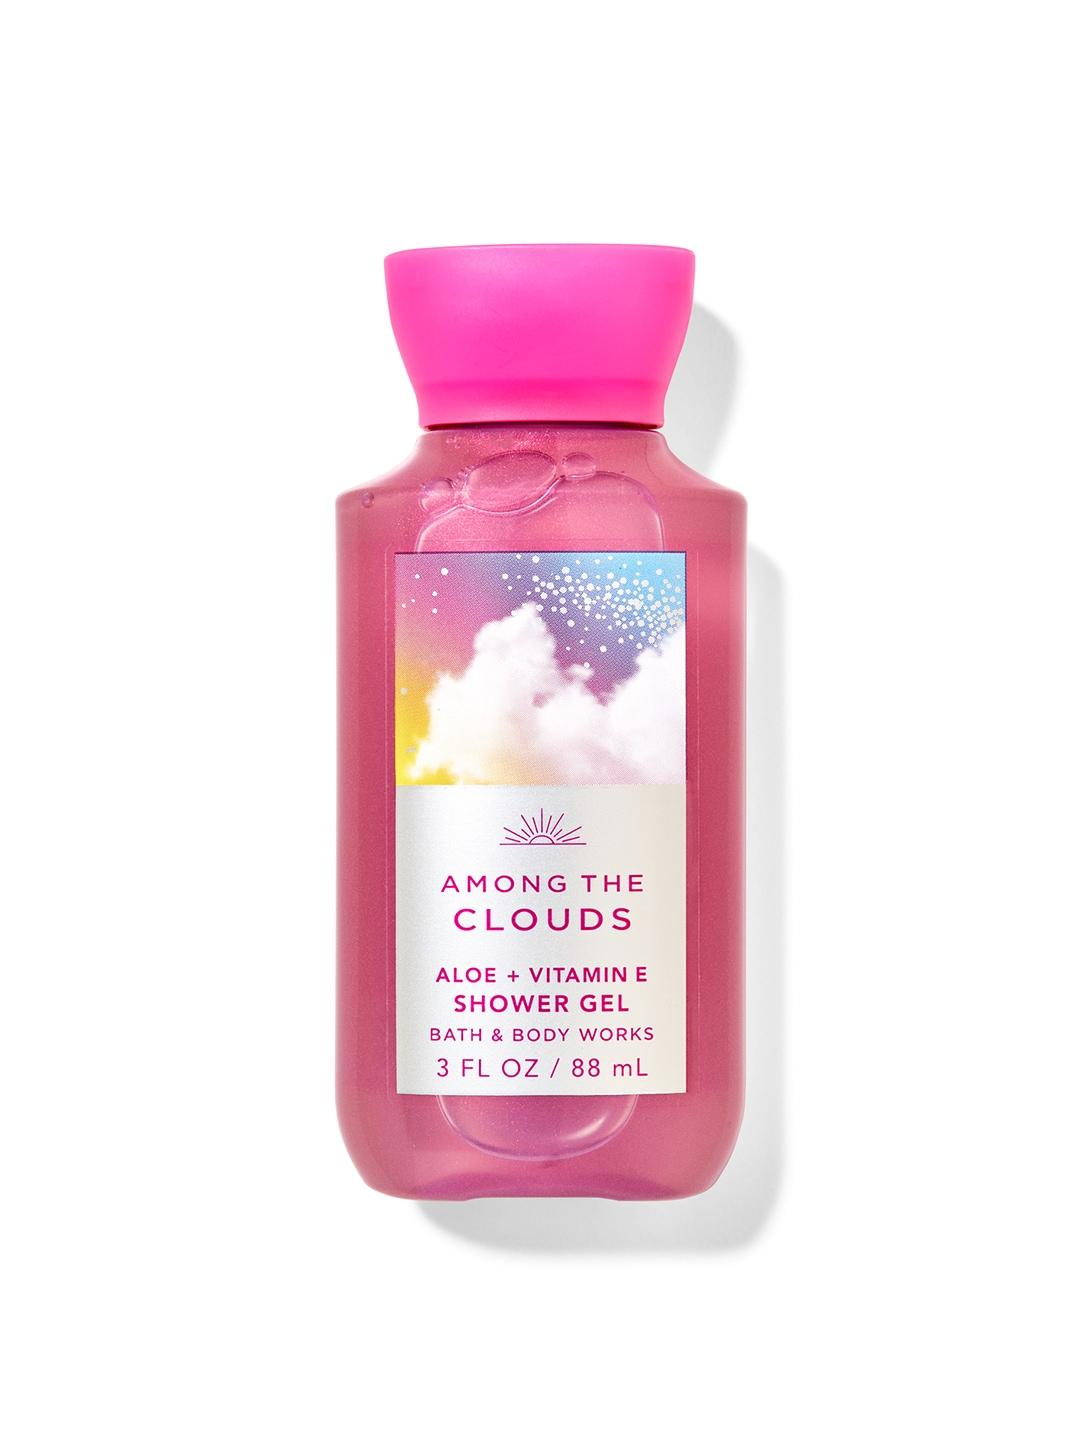 Bath & Body Works Among the Clouds Travel Size Shower Gel with Aloe & Vit E - 88 ml